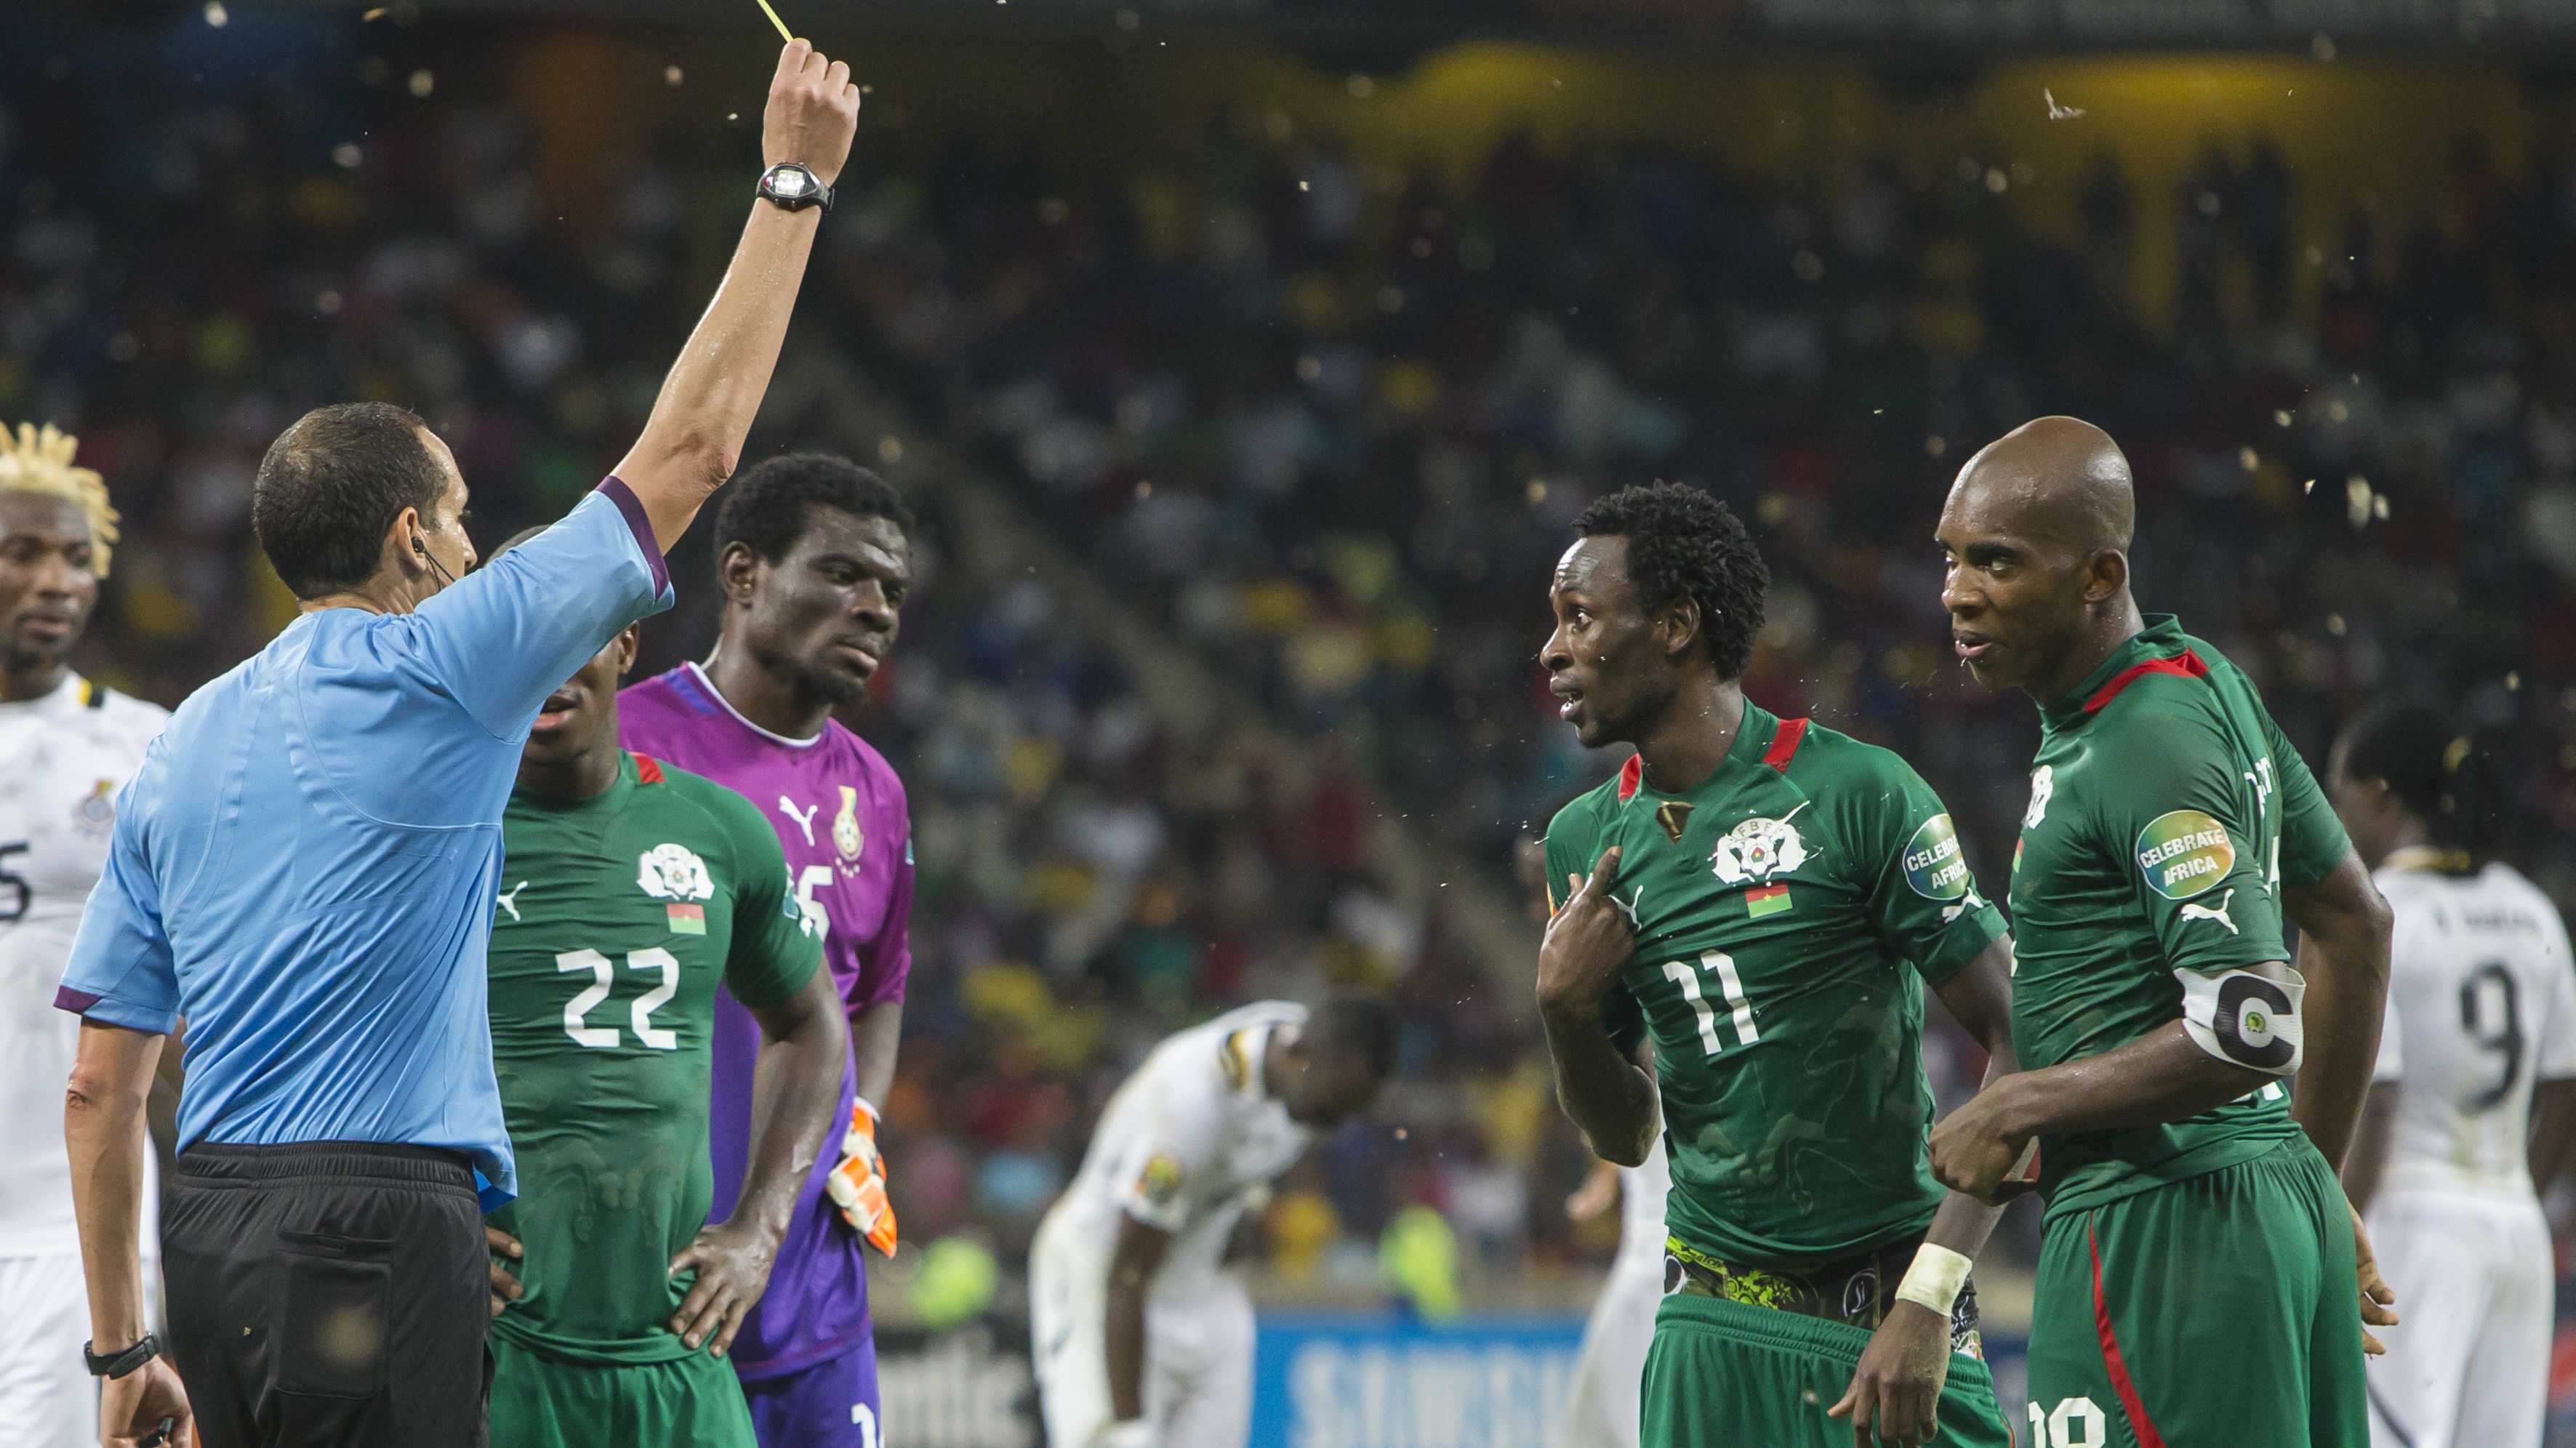 Burkina Faso's Jonathan Pitroipa is shown a second yello card in his side's semifinal win over Ghana.